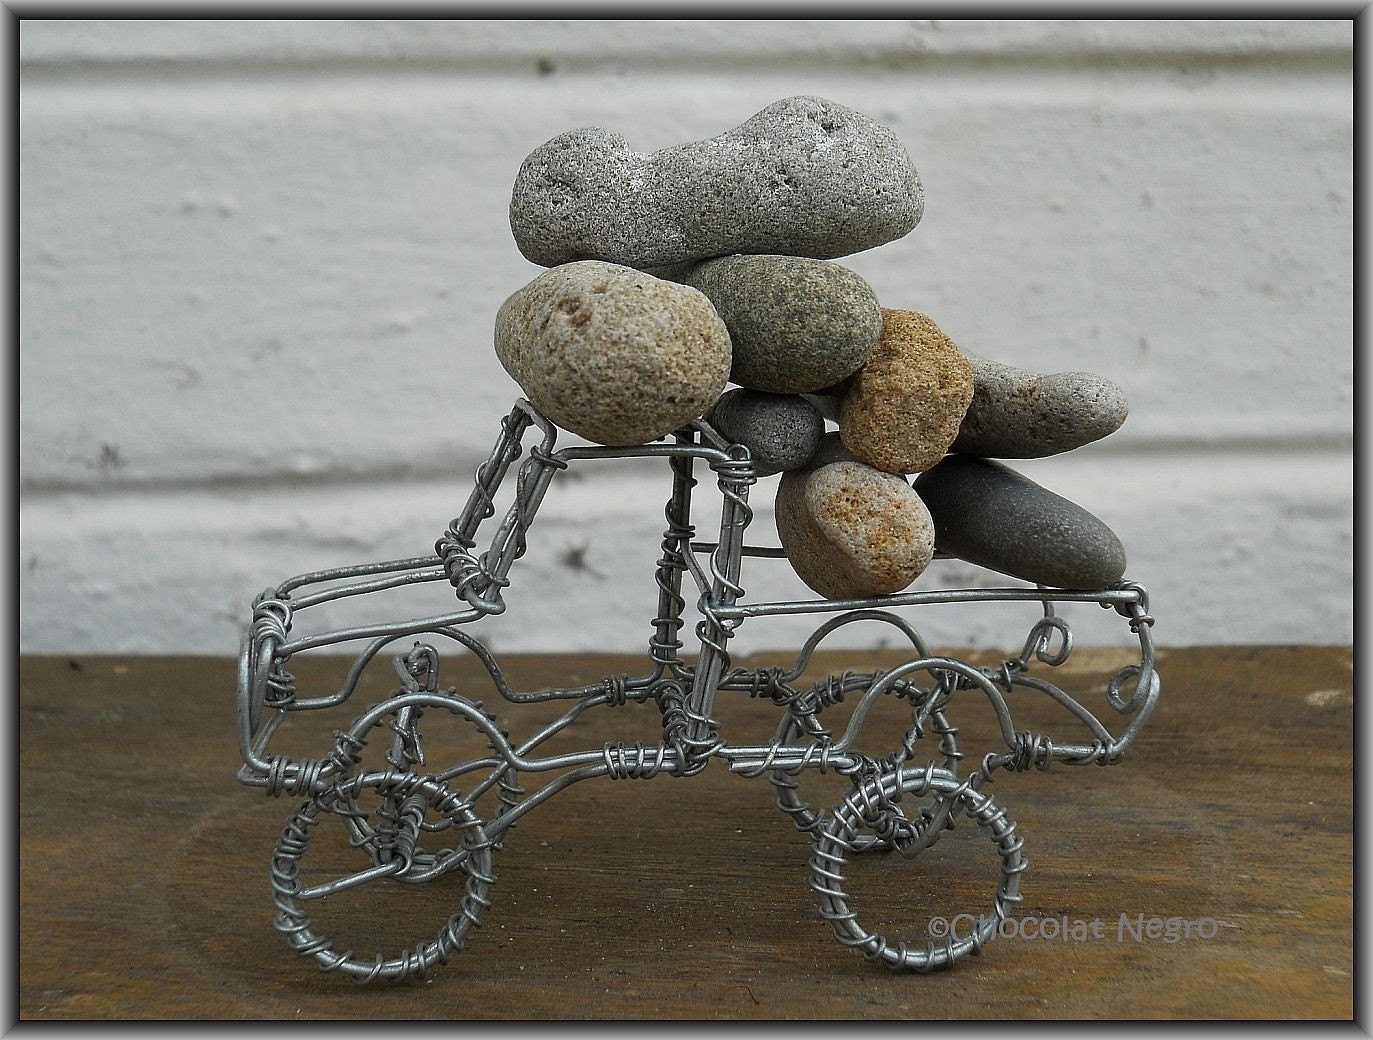 OVERLOAD - A LANDROVER CAN NEVER BE BROUGHT TO HIS KNEES - THE LANDROVER SERIES recycled wire art sculpture of a landrover